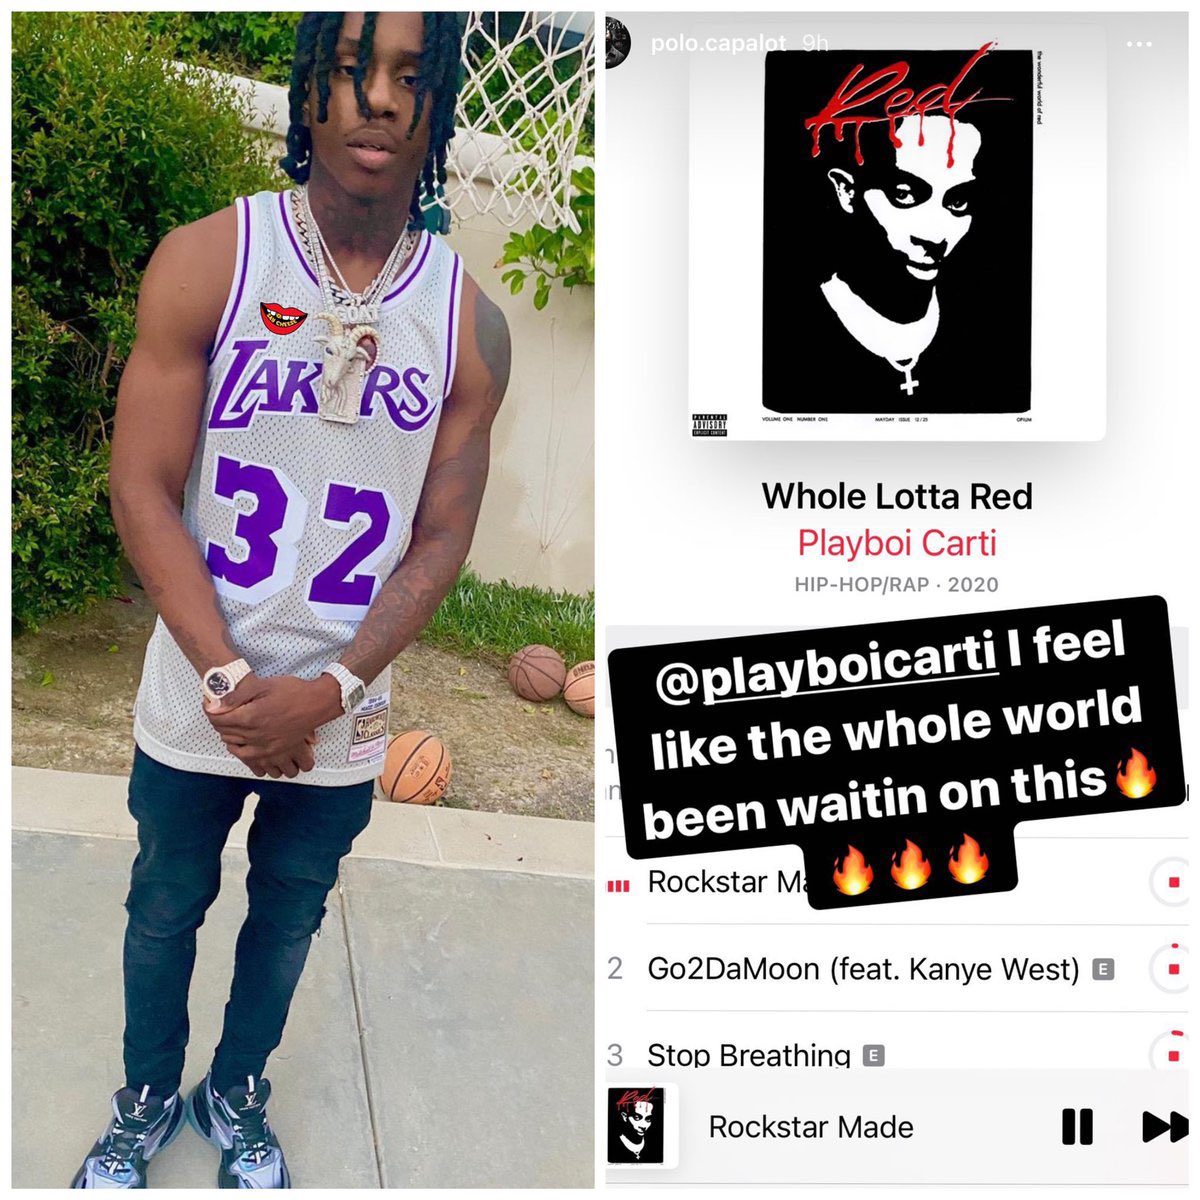 physically clumsy Strong wind Polo G Fan Page 🐐 on Twitter: "Don't forget that Polo G was the only  artist that promoted Whole Lotta Red by Playboi Carti when it released👀🔥  https://t.co/sPcaxvo9ie" / Twitter